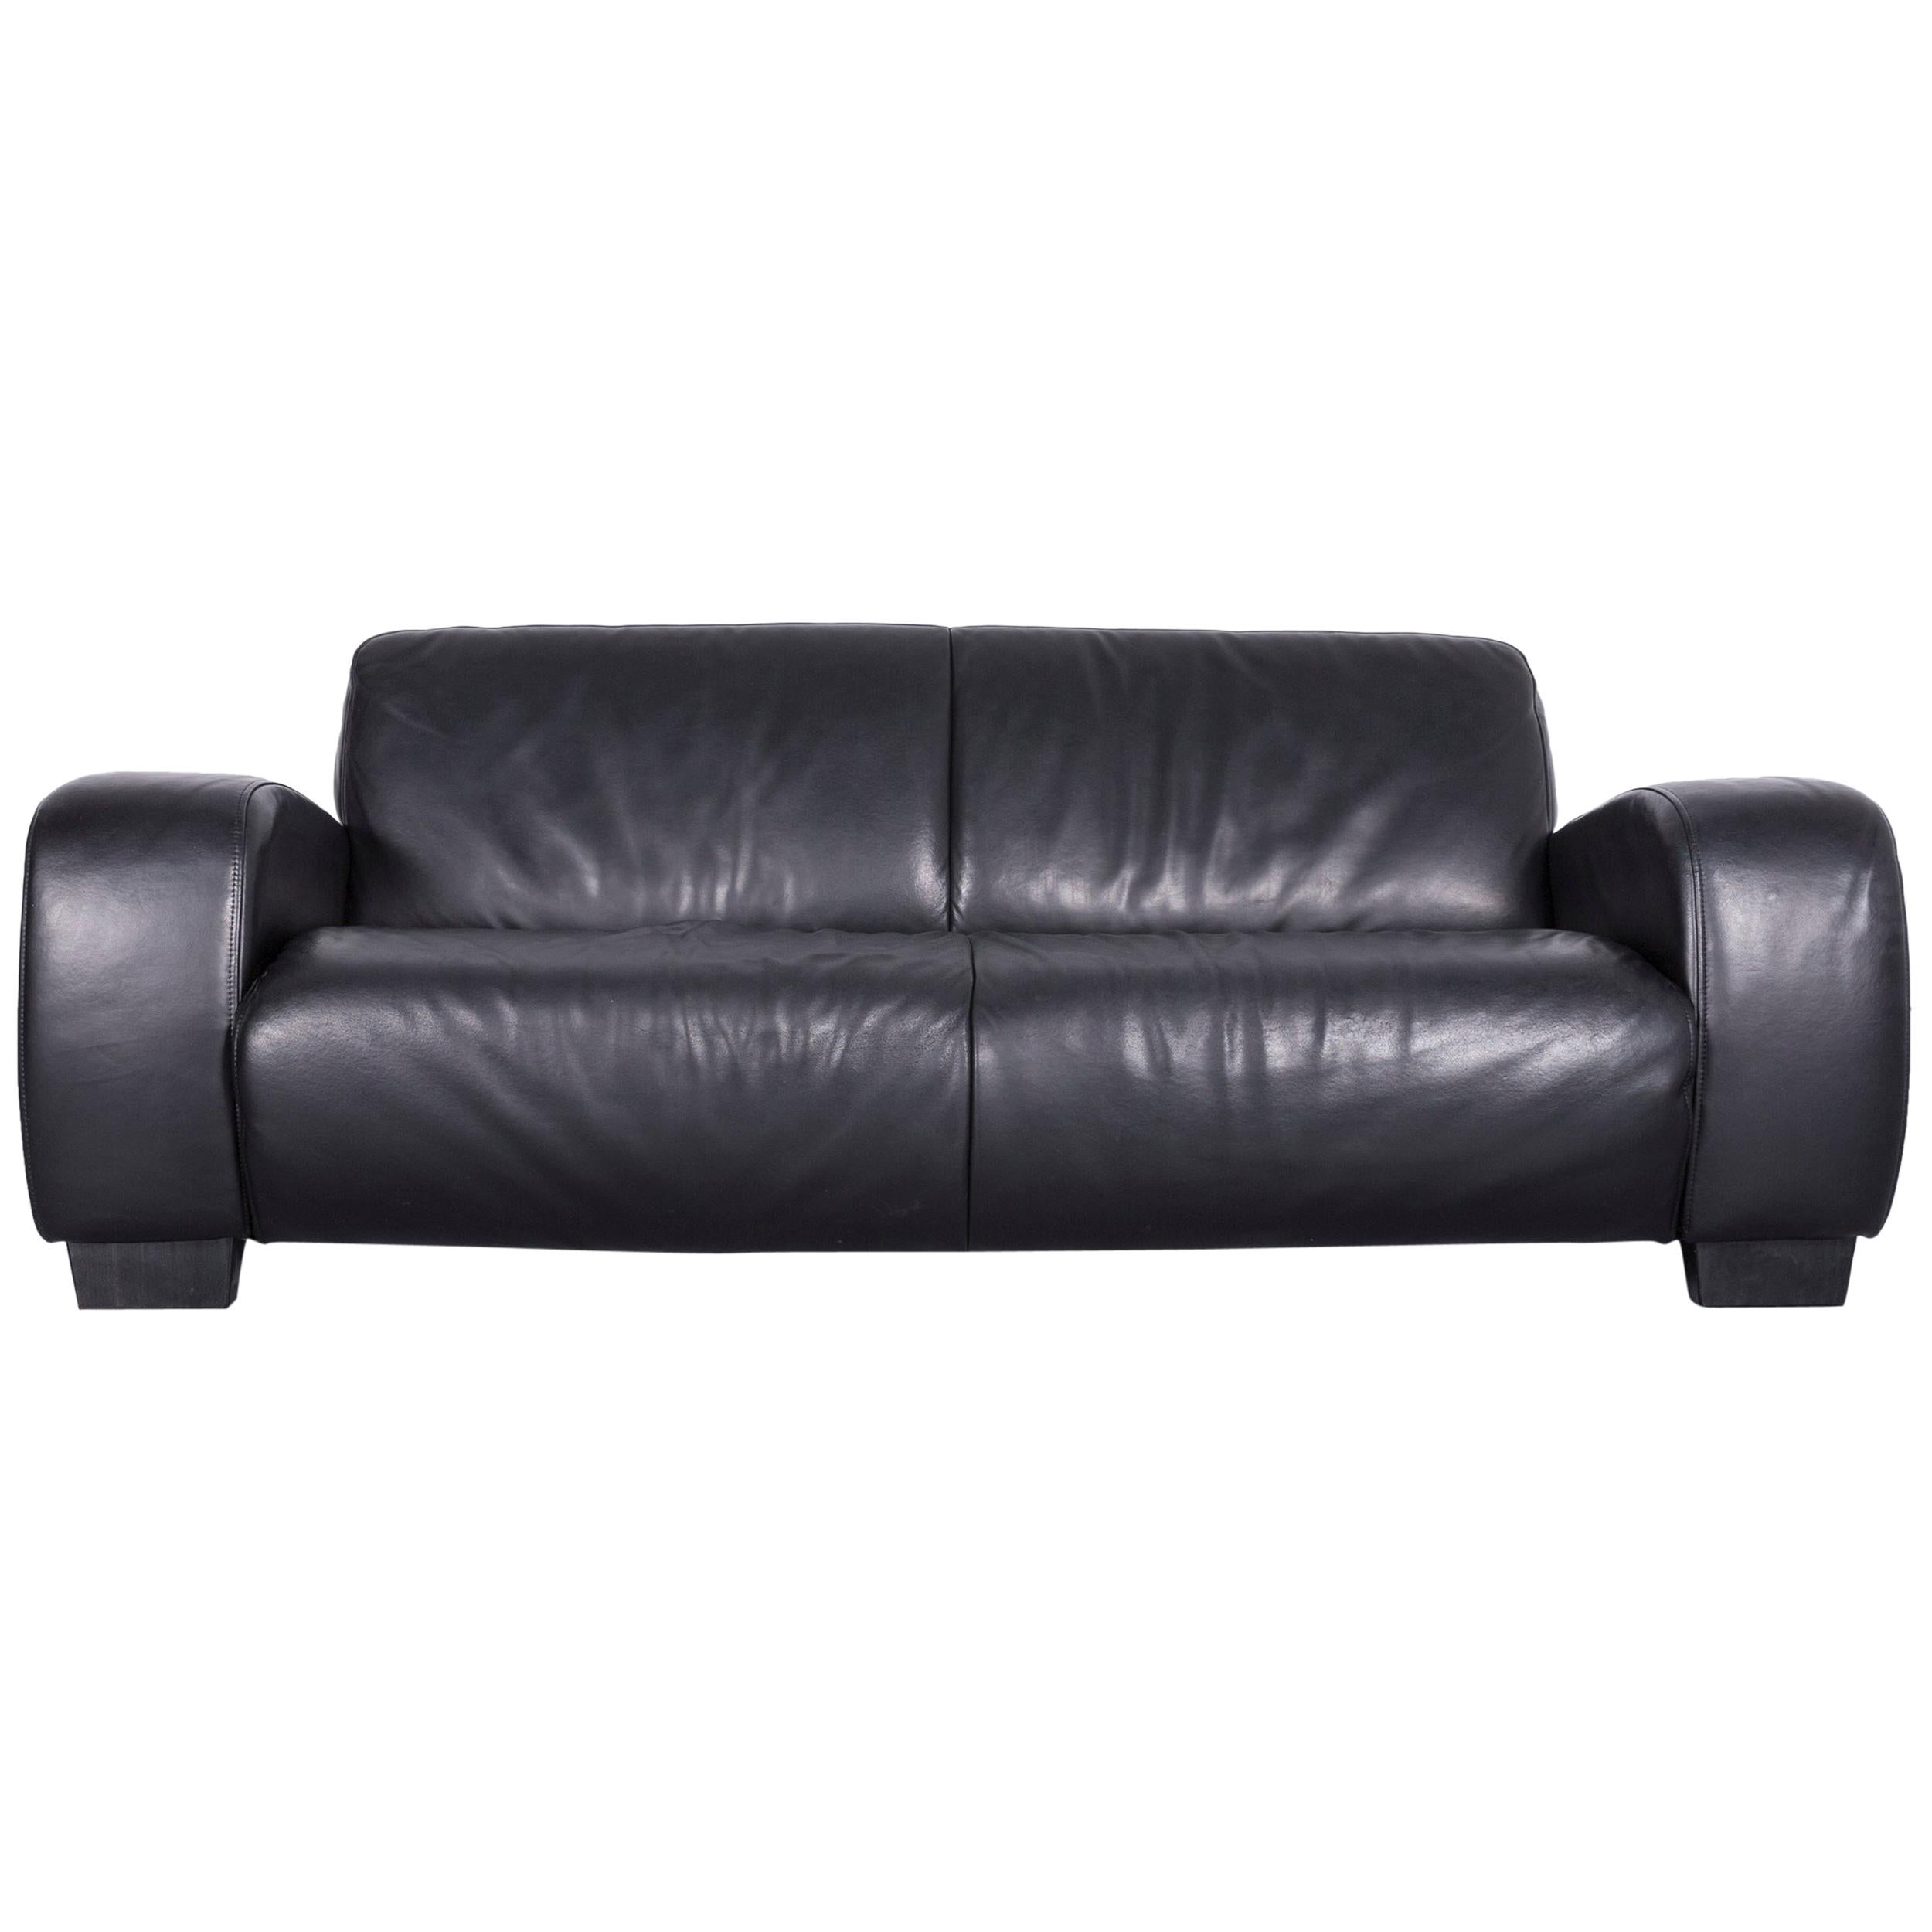 Koinor Designer Leather Sofa Black Two-Seat Couch